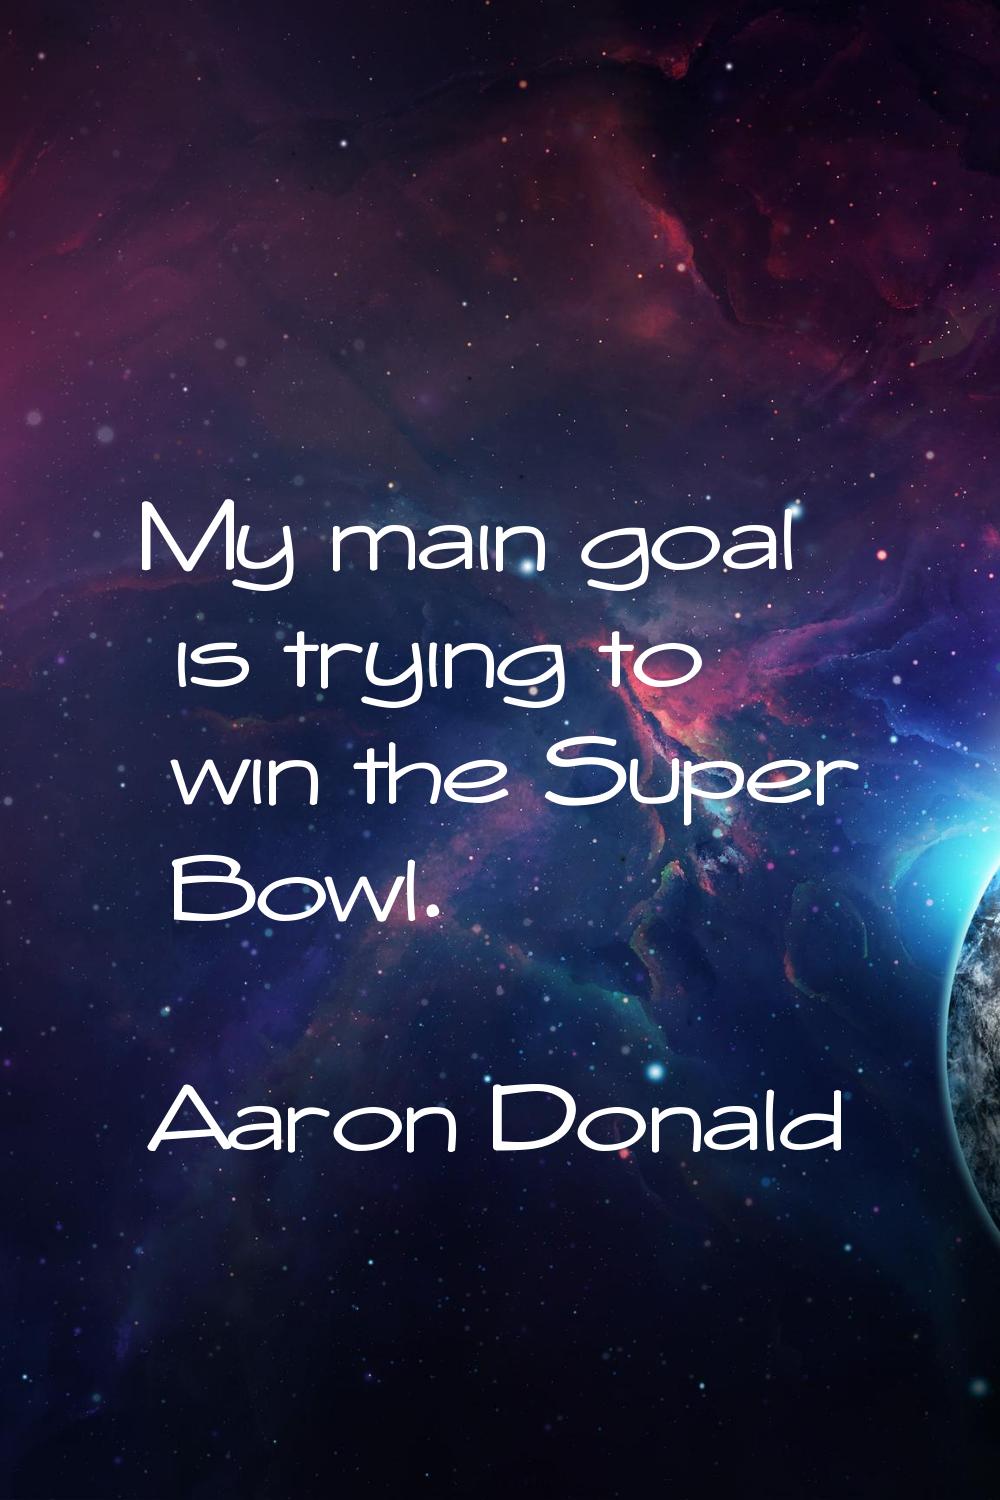 My main goal is trying to win the Super Bowl.